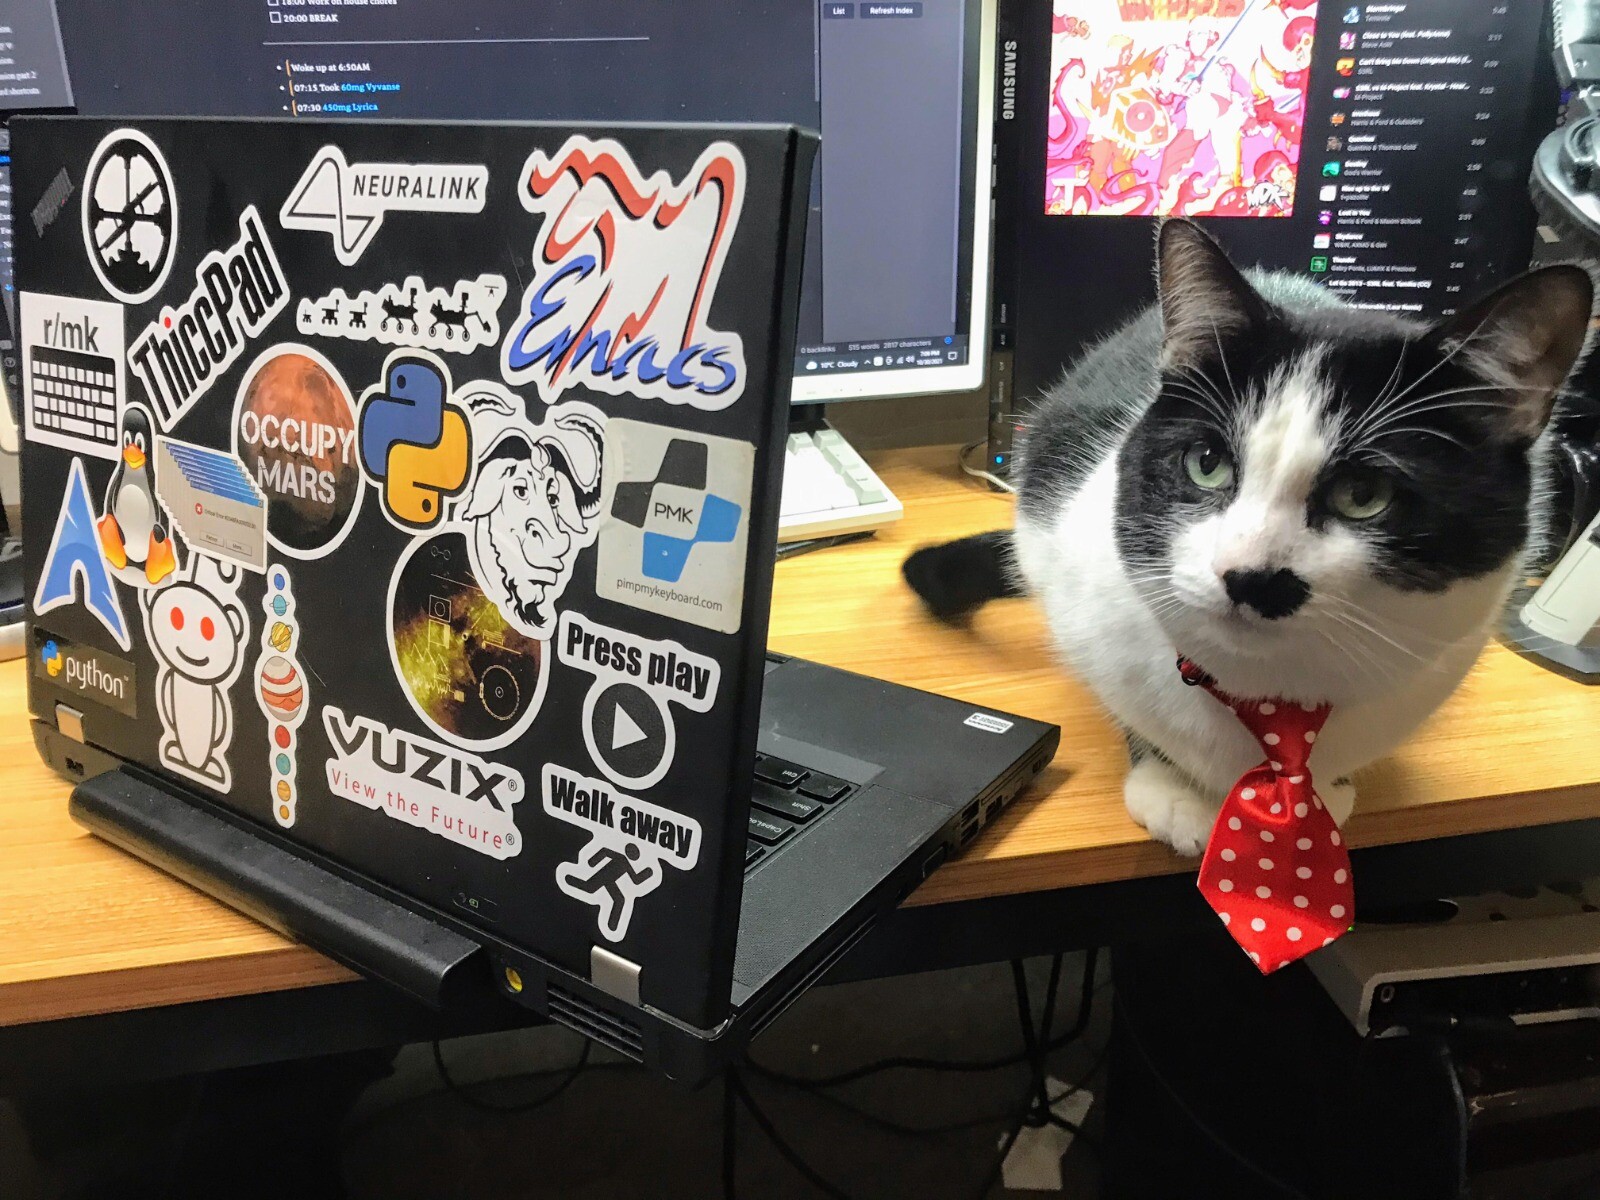 "A cat wearing a tiny \"tie\" sits atop an office desk next to a laptop peppered with many Free Software stickers, clearly a hacker's laptop. (Not mine)"